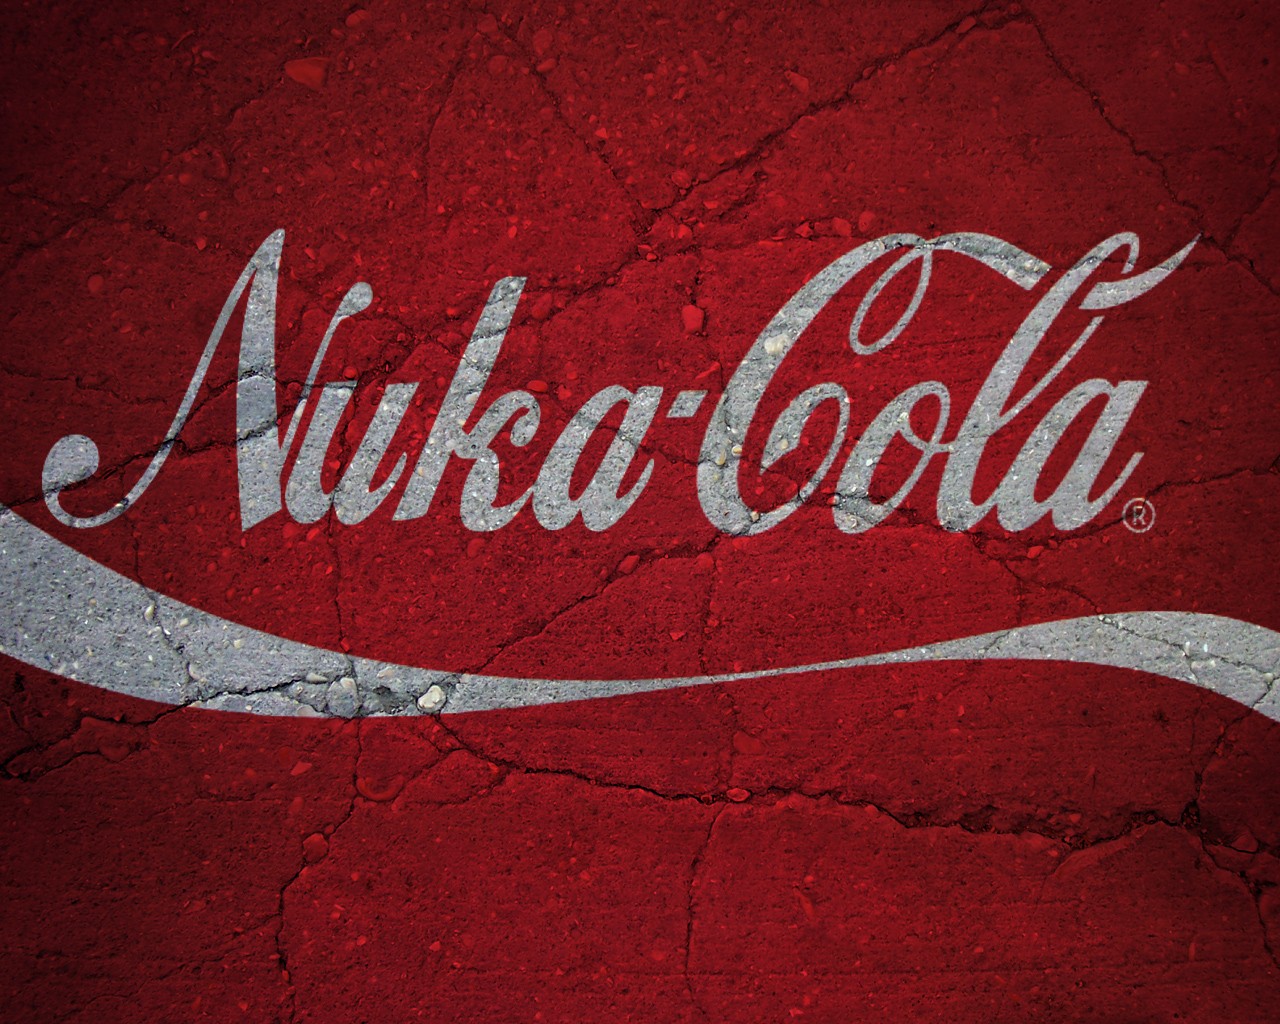 General 1280x1024 Coca-Cola Nuka-Cola Fallout video games PC gaming video game art